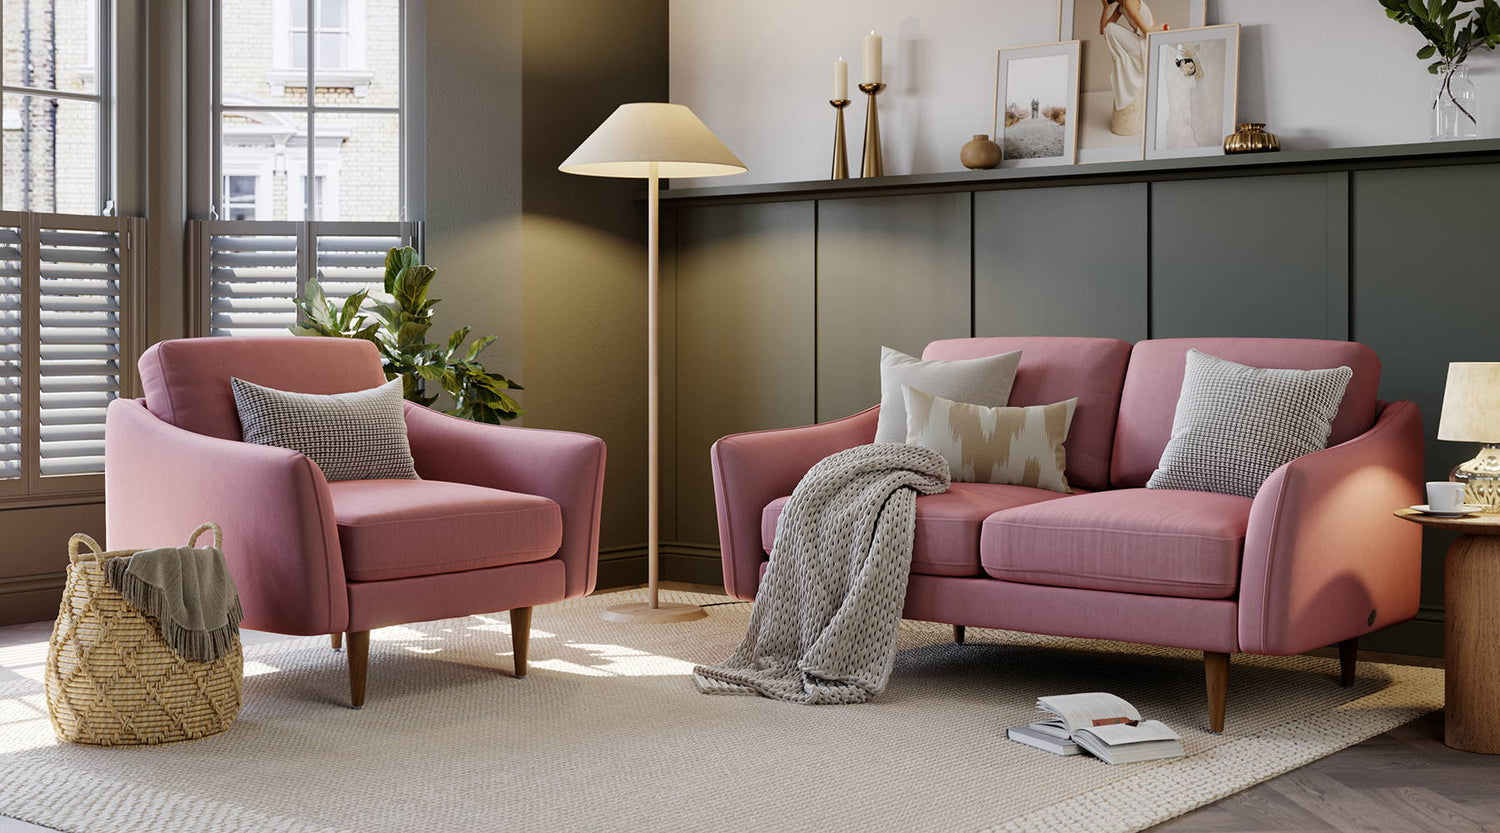 NEW Blush Pink Sofas are Here! – Snug